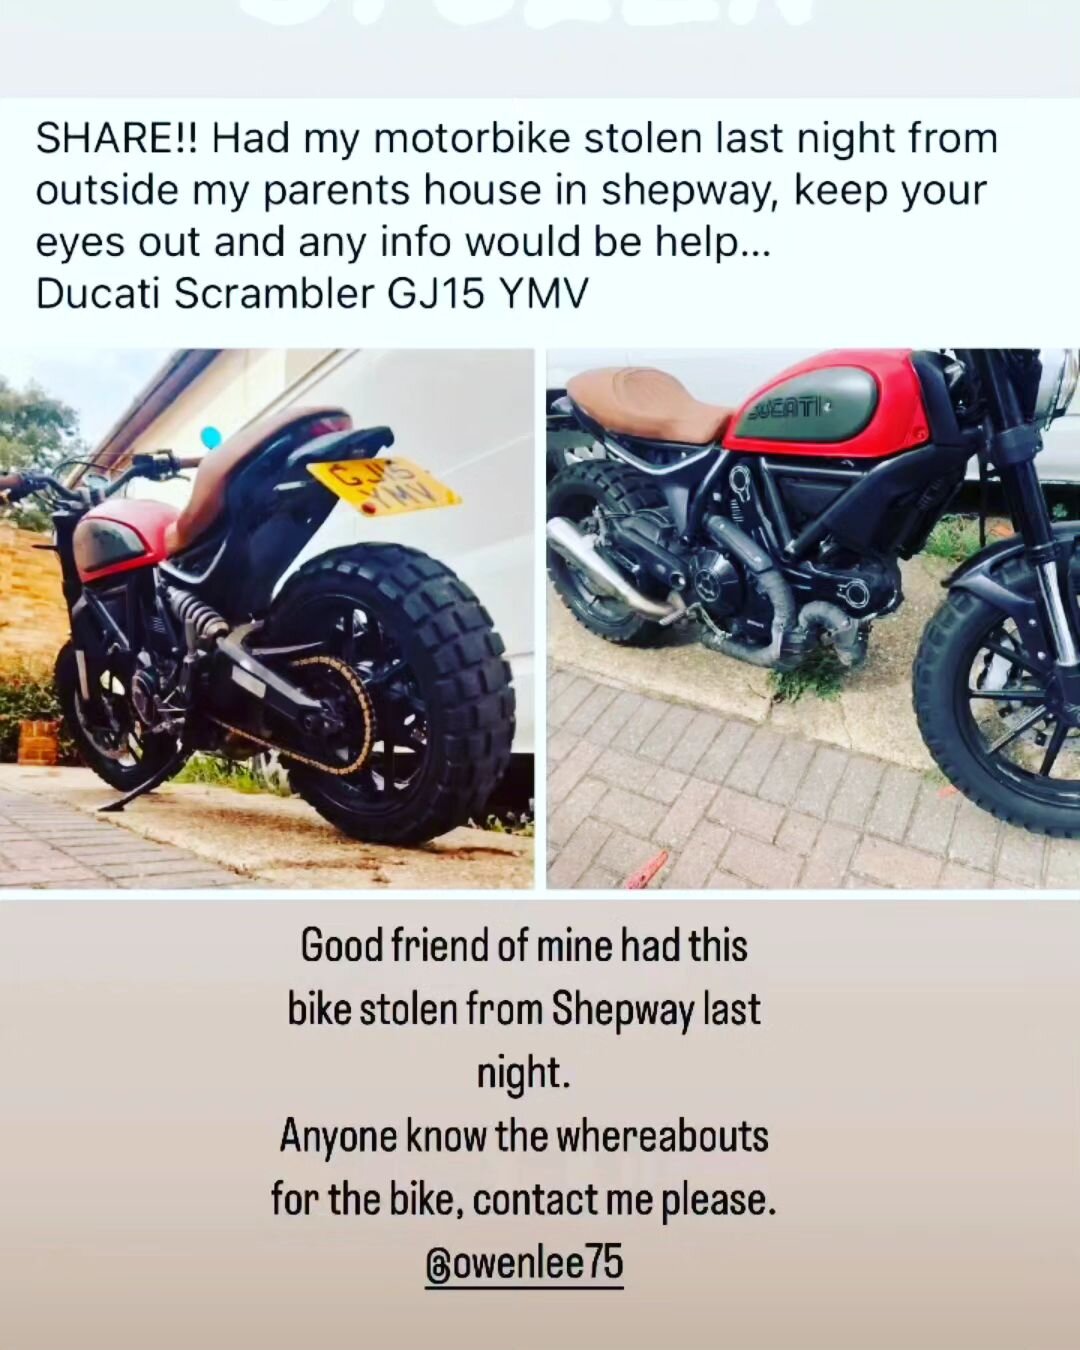 If anyone see's or hear's of this (very distinctive) bike, please let us know or Lee directly ASAP 👍👍👍👍👍